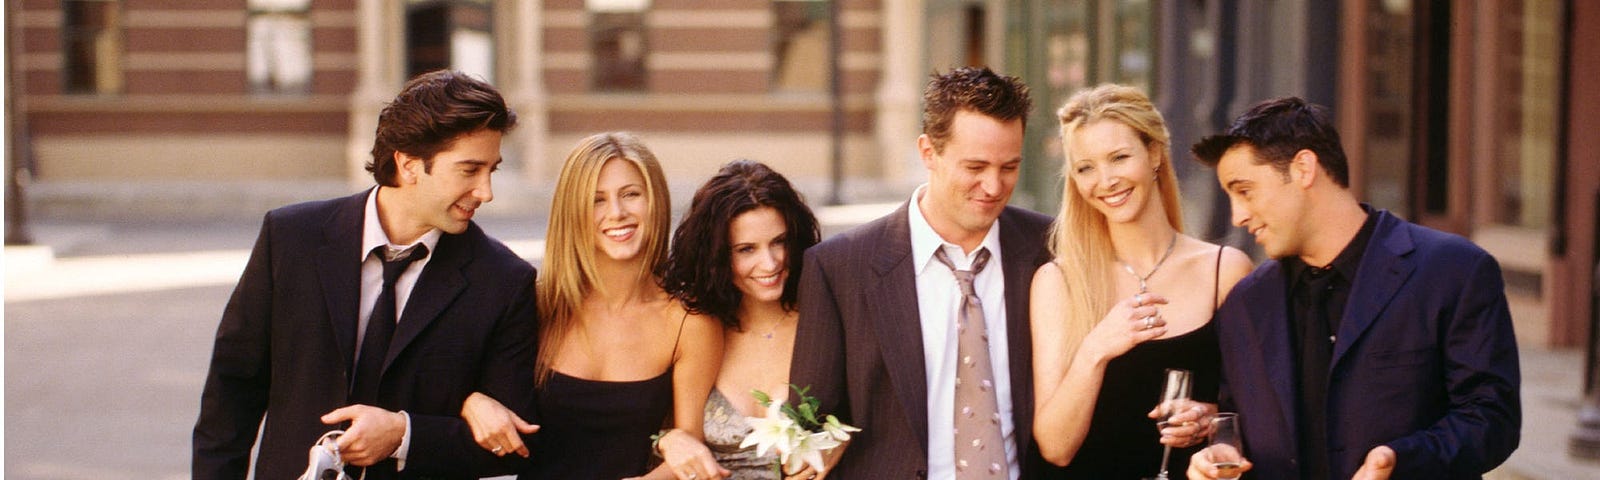 The cast of “Friends.”